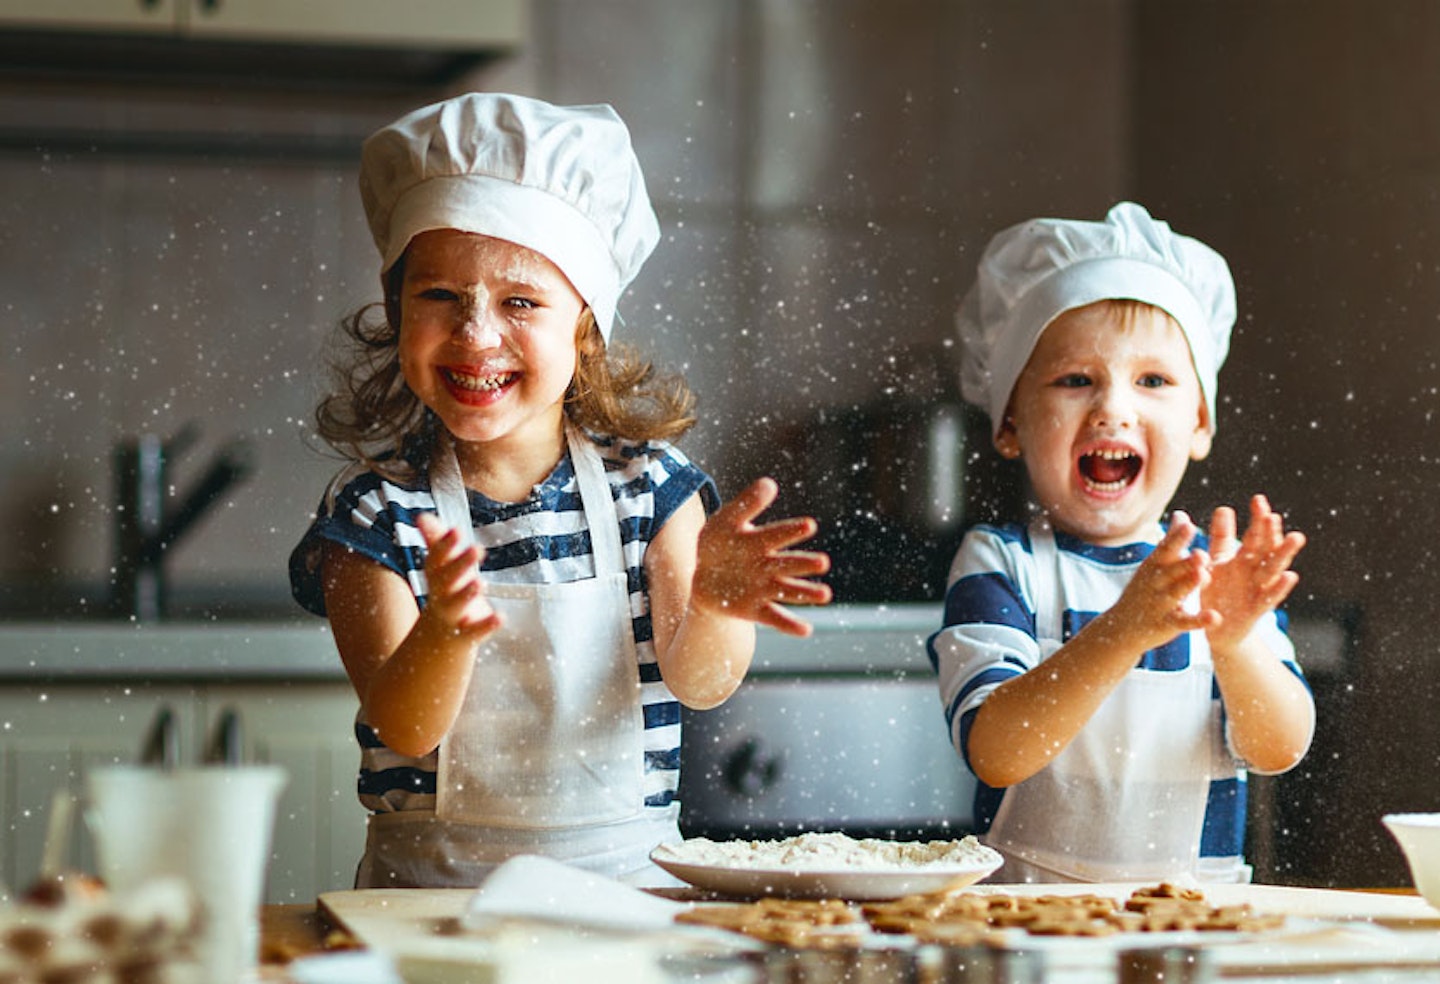 Children learning baking hats, baking and laughing with flour in the air